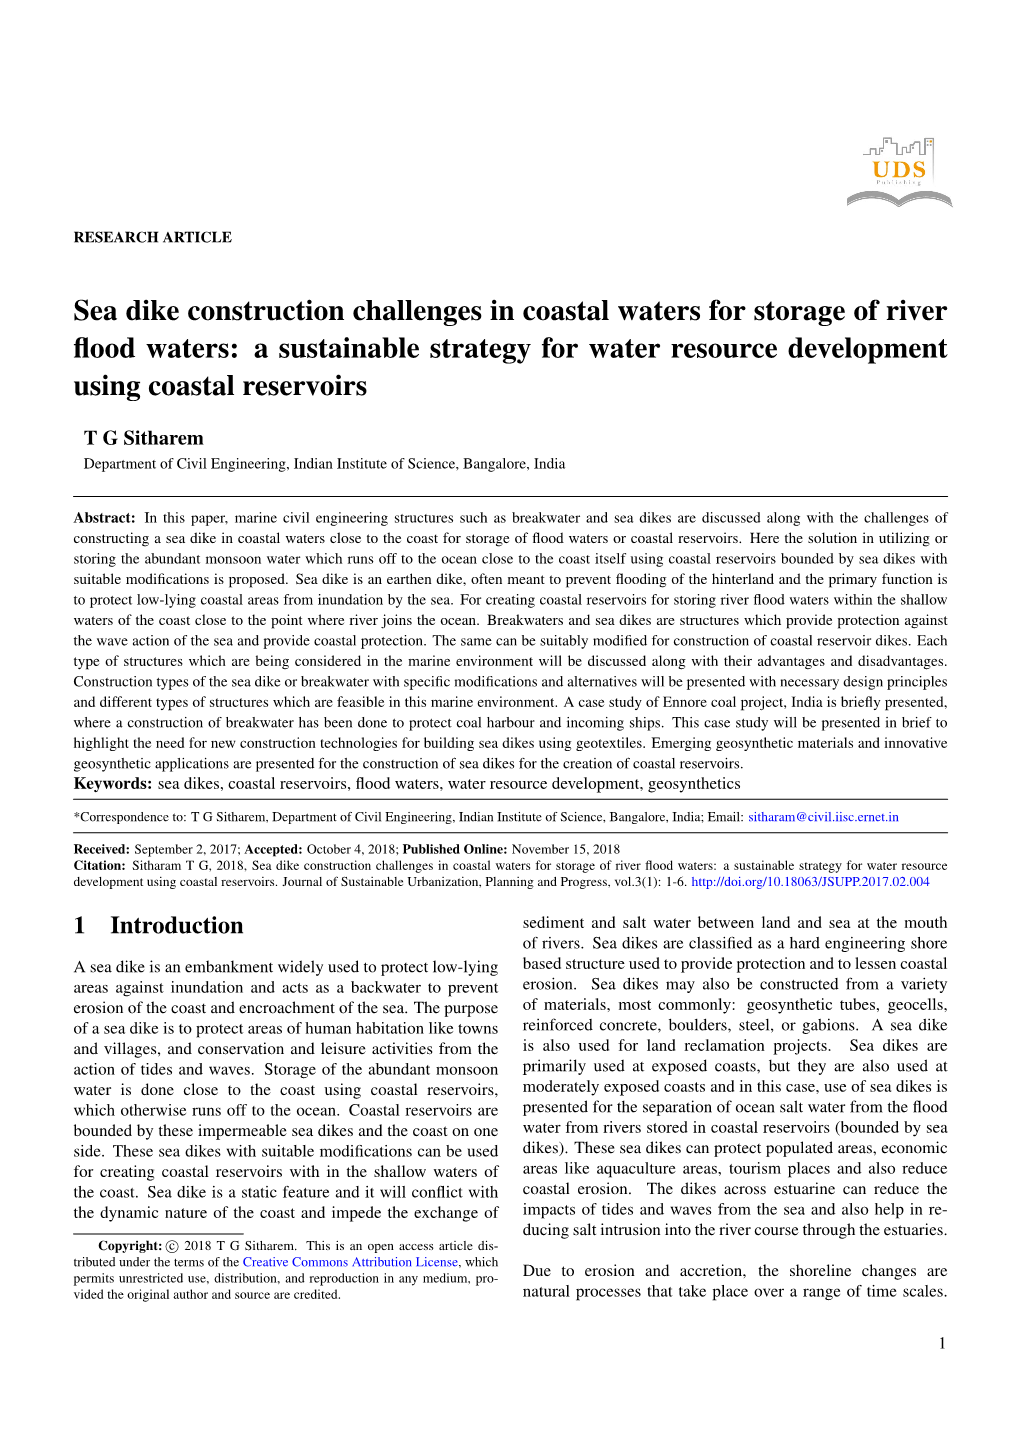 Sea Dike Construction Challenges in Coastal Waters for Storage of River ﬂood Waters: a Sustainable Strategy for Water Resource Development Using Coastal Reservoirs